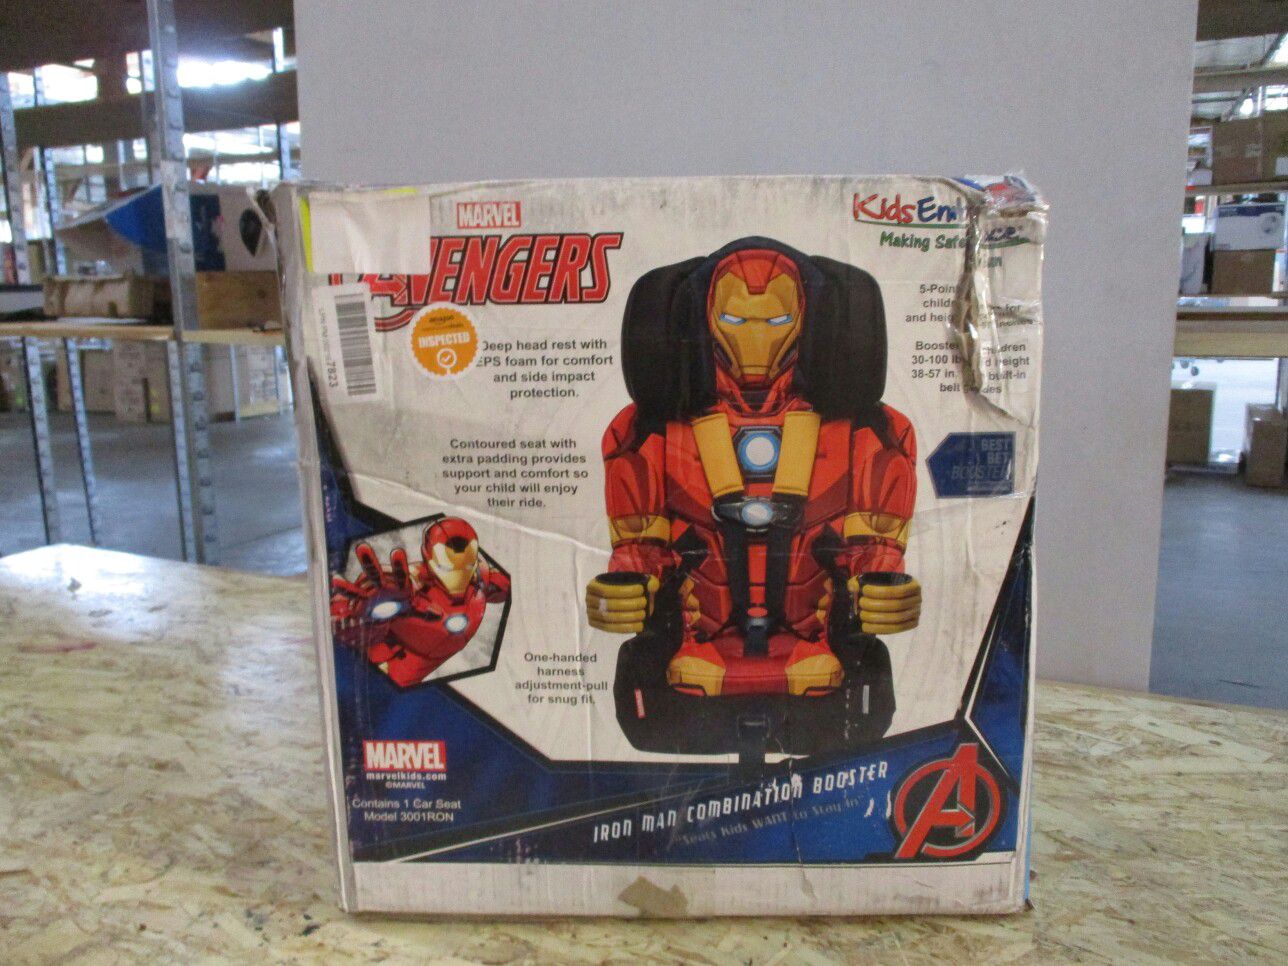 Avengers Contoured seat with extra padding provides support KidsEmbrace